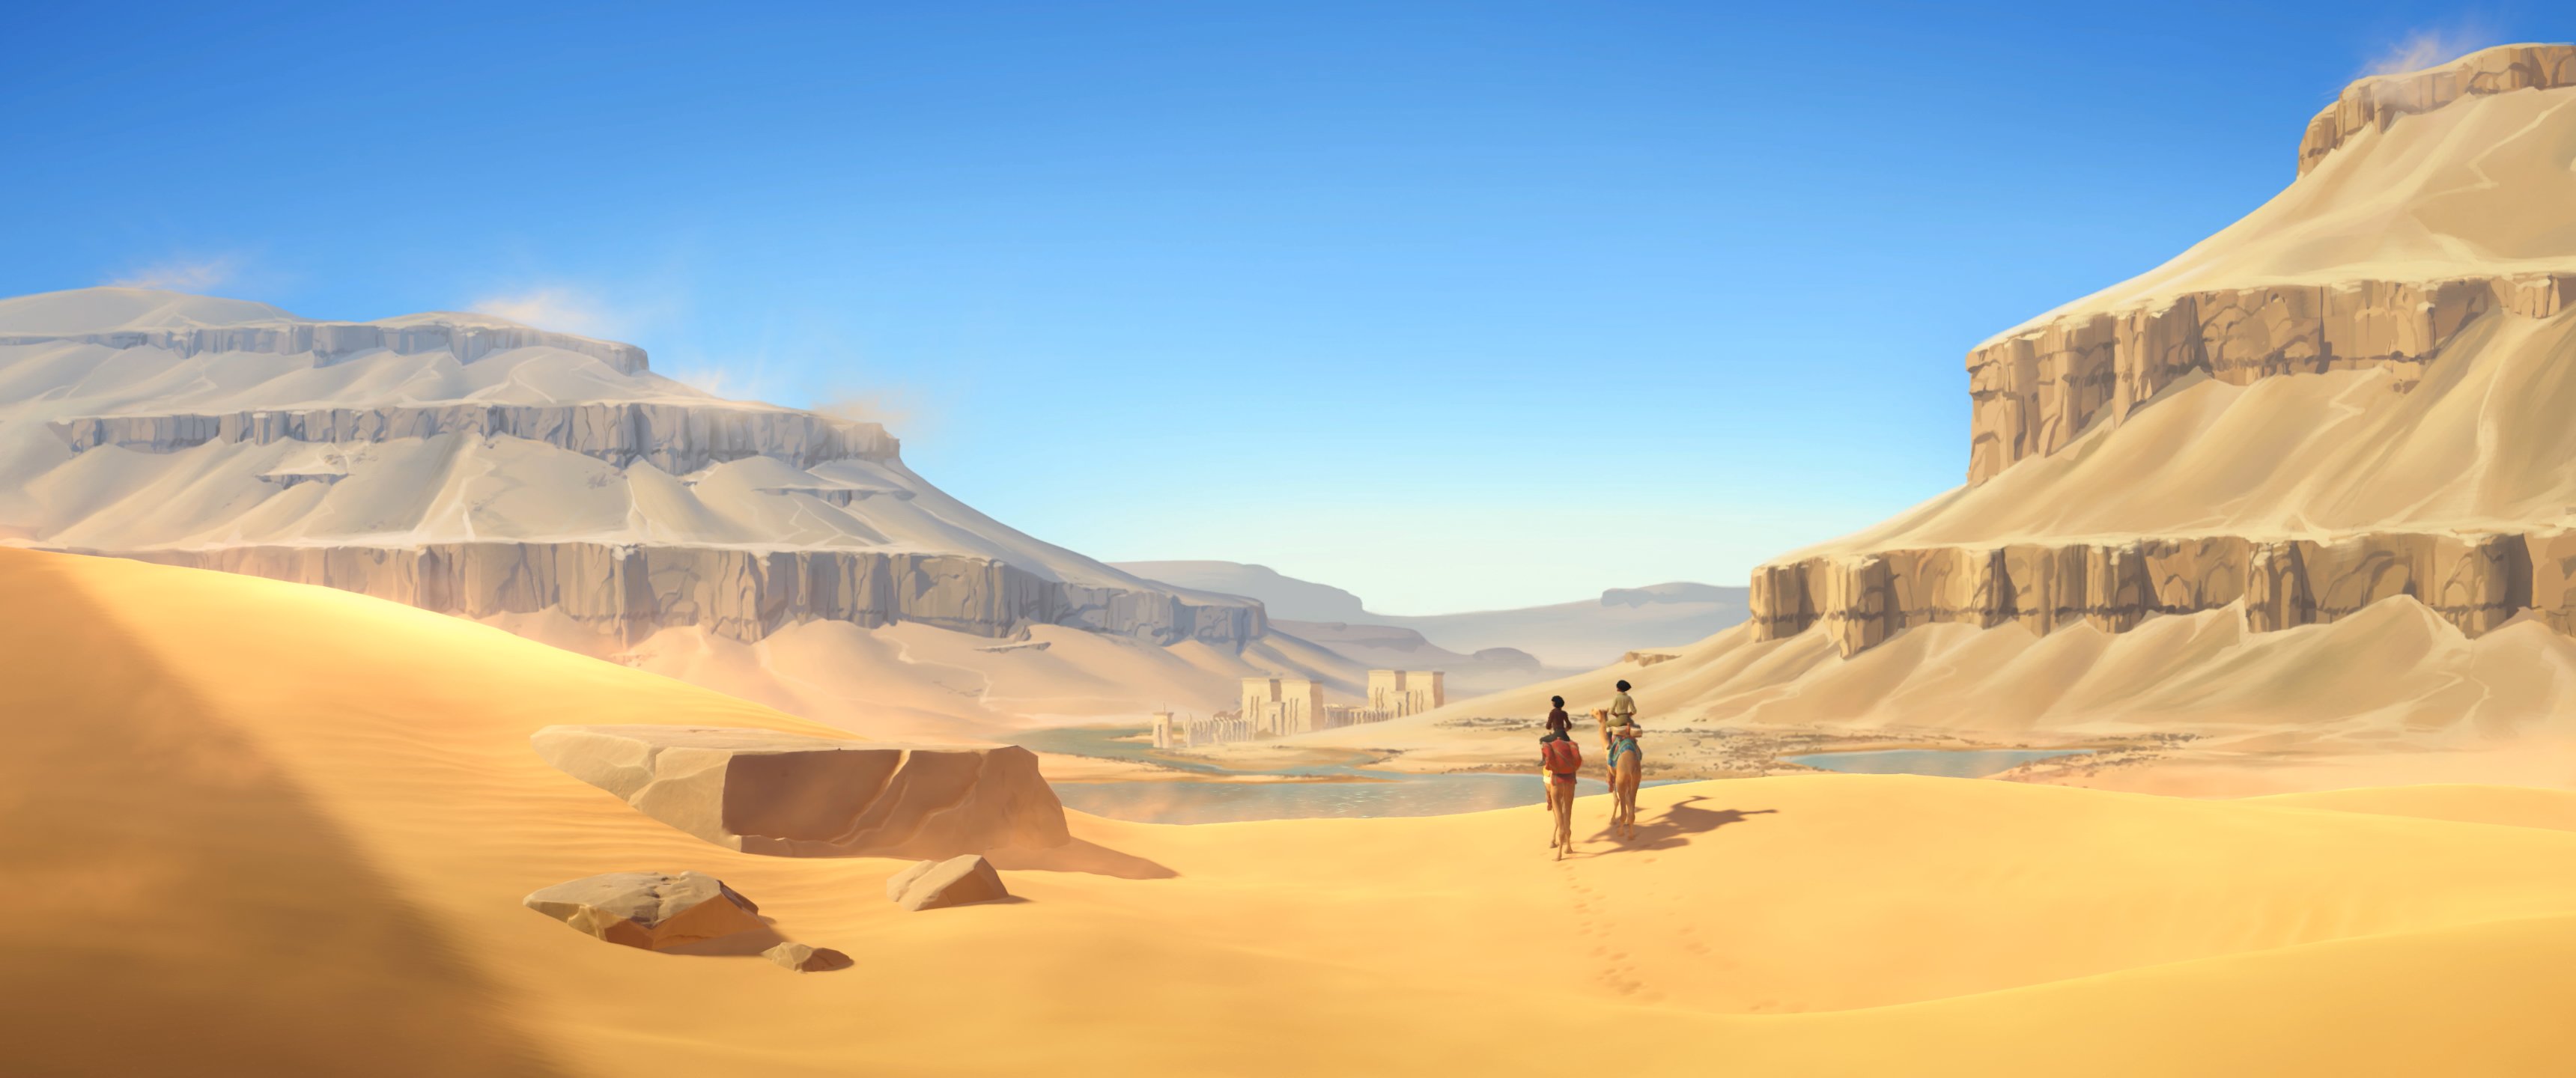 Two figures stand in an Egyptian desert valley beneath a blue sky in a screenshot from In the Valley of Gods.